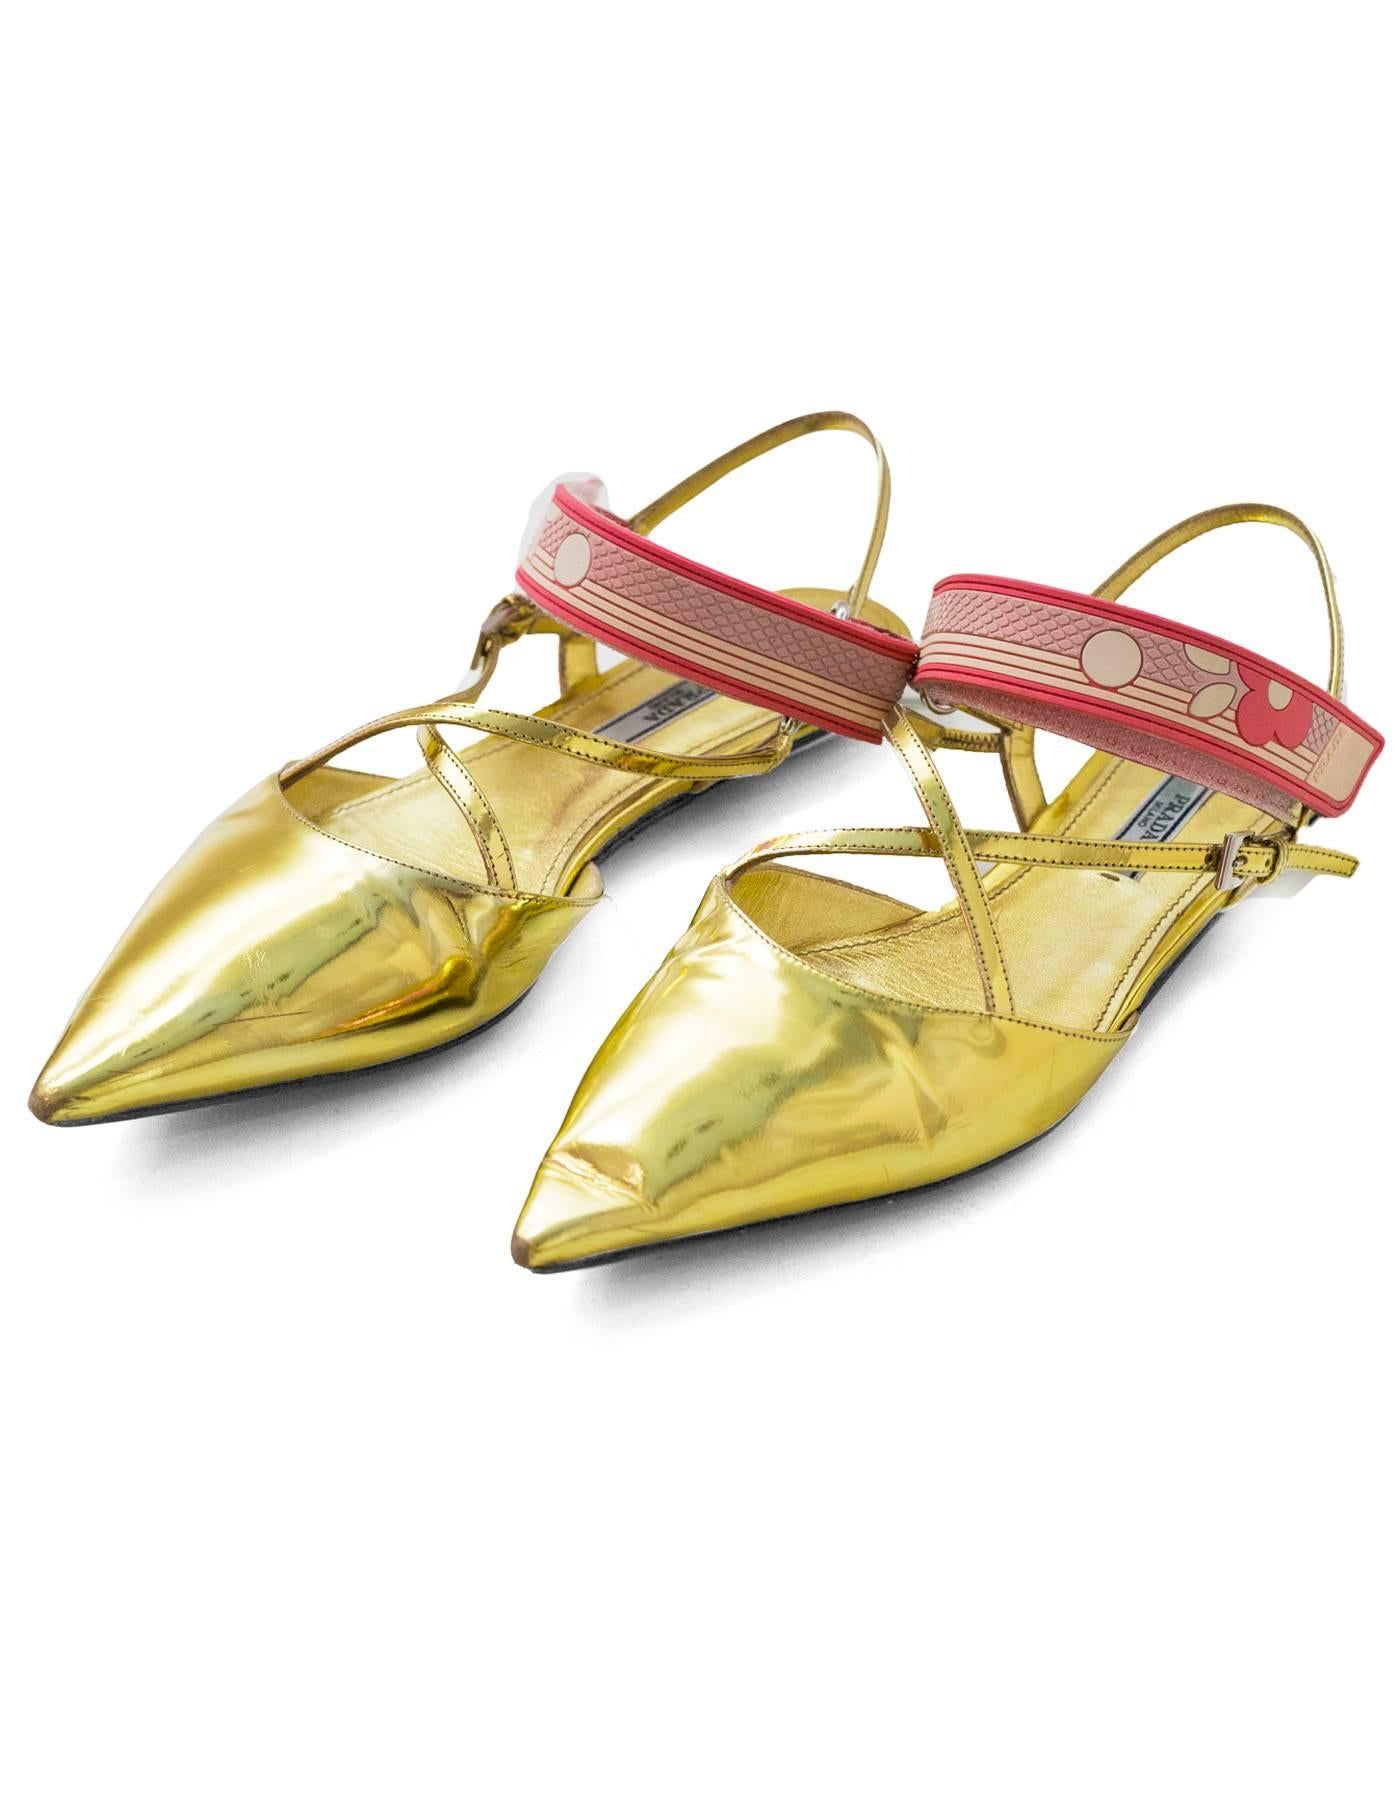 Prada Gold Glazed Leather Flats Sz 38.5

Features pink strap across vamp

Made In: Italy
Color: Gold, pink
Materials: Glazed leather
Closure/Opening: Velcro strap across vamp
Sole Stamp: Prada 38.5 Made in Italy
Overall Condition: Very good